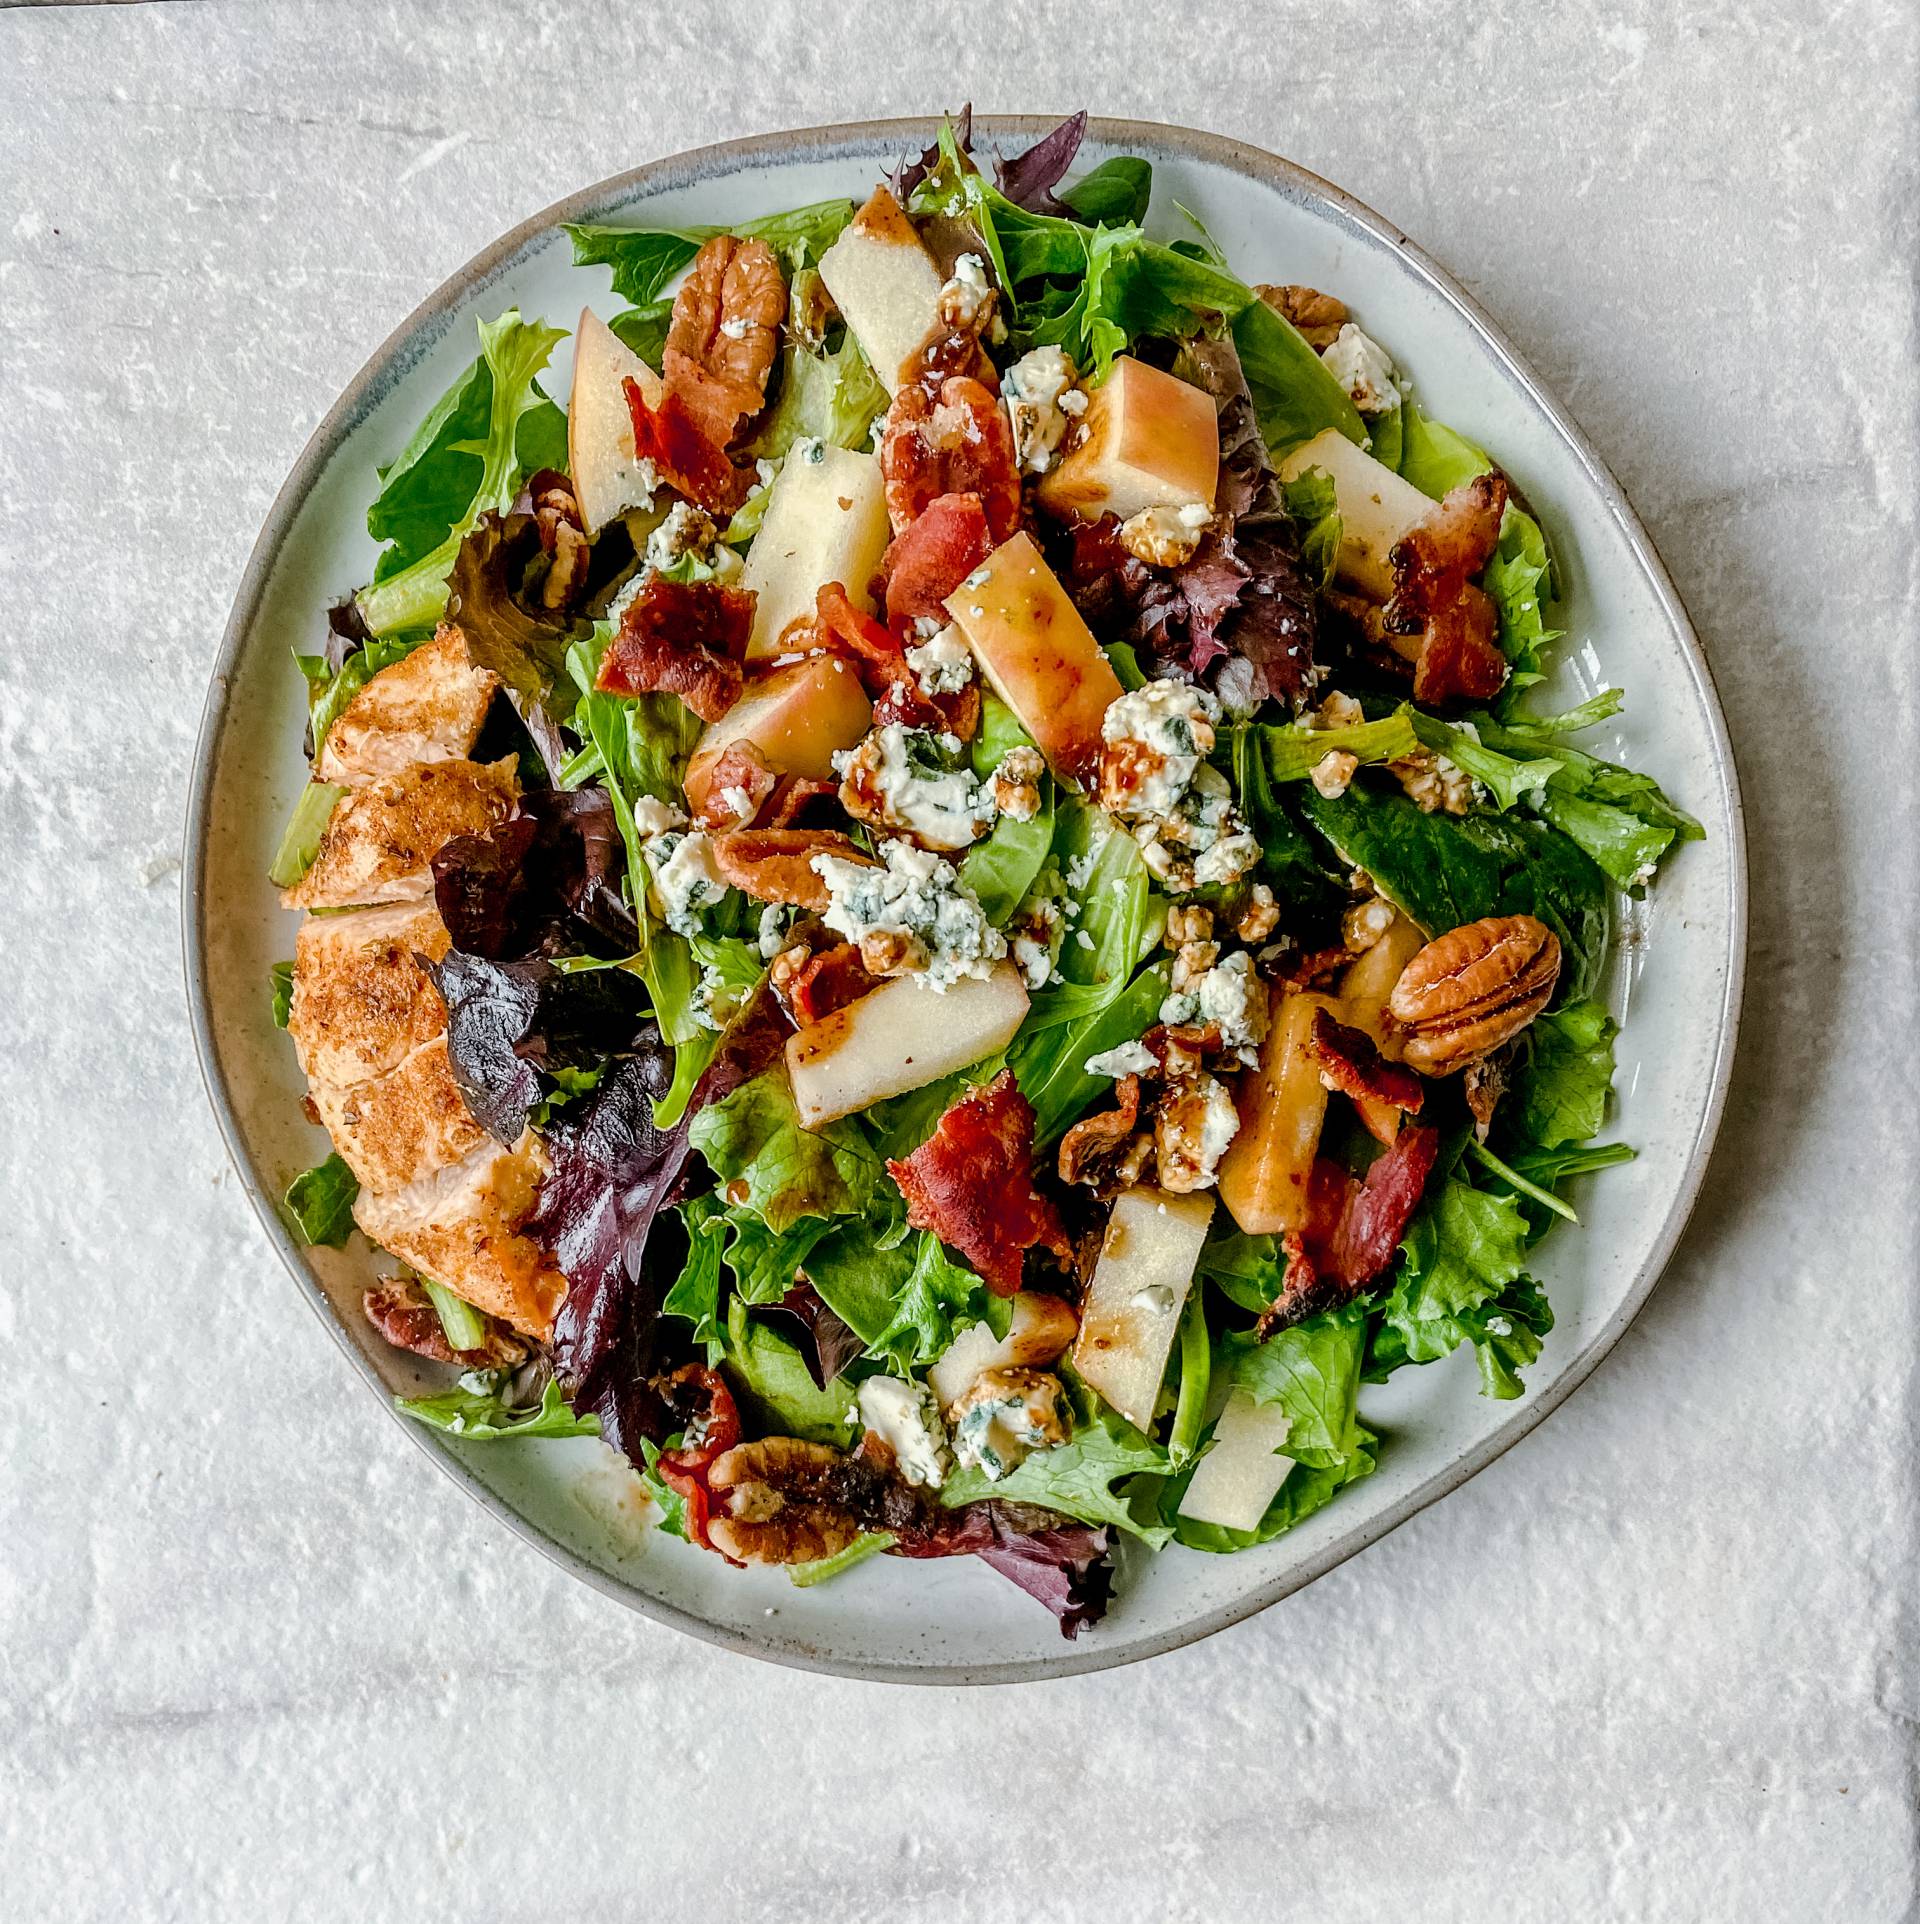 Balsamic, Bacon, Blue cheese salad with chicken